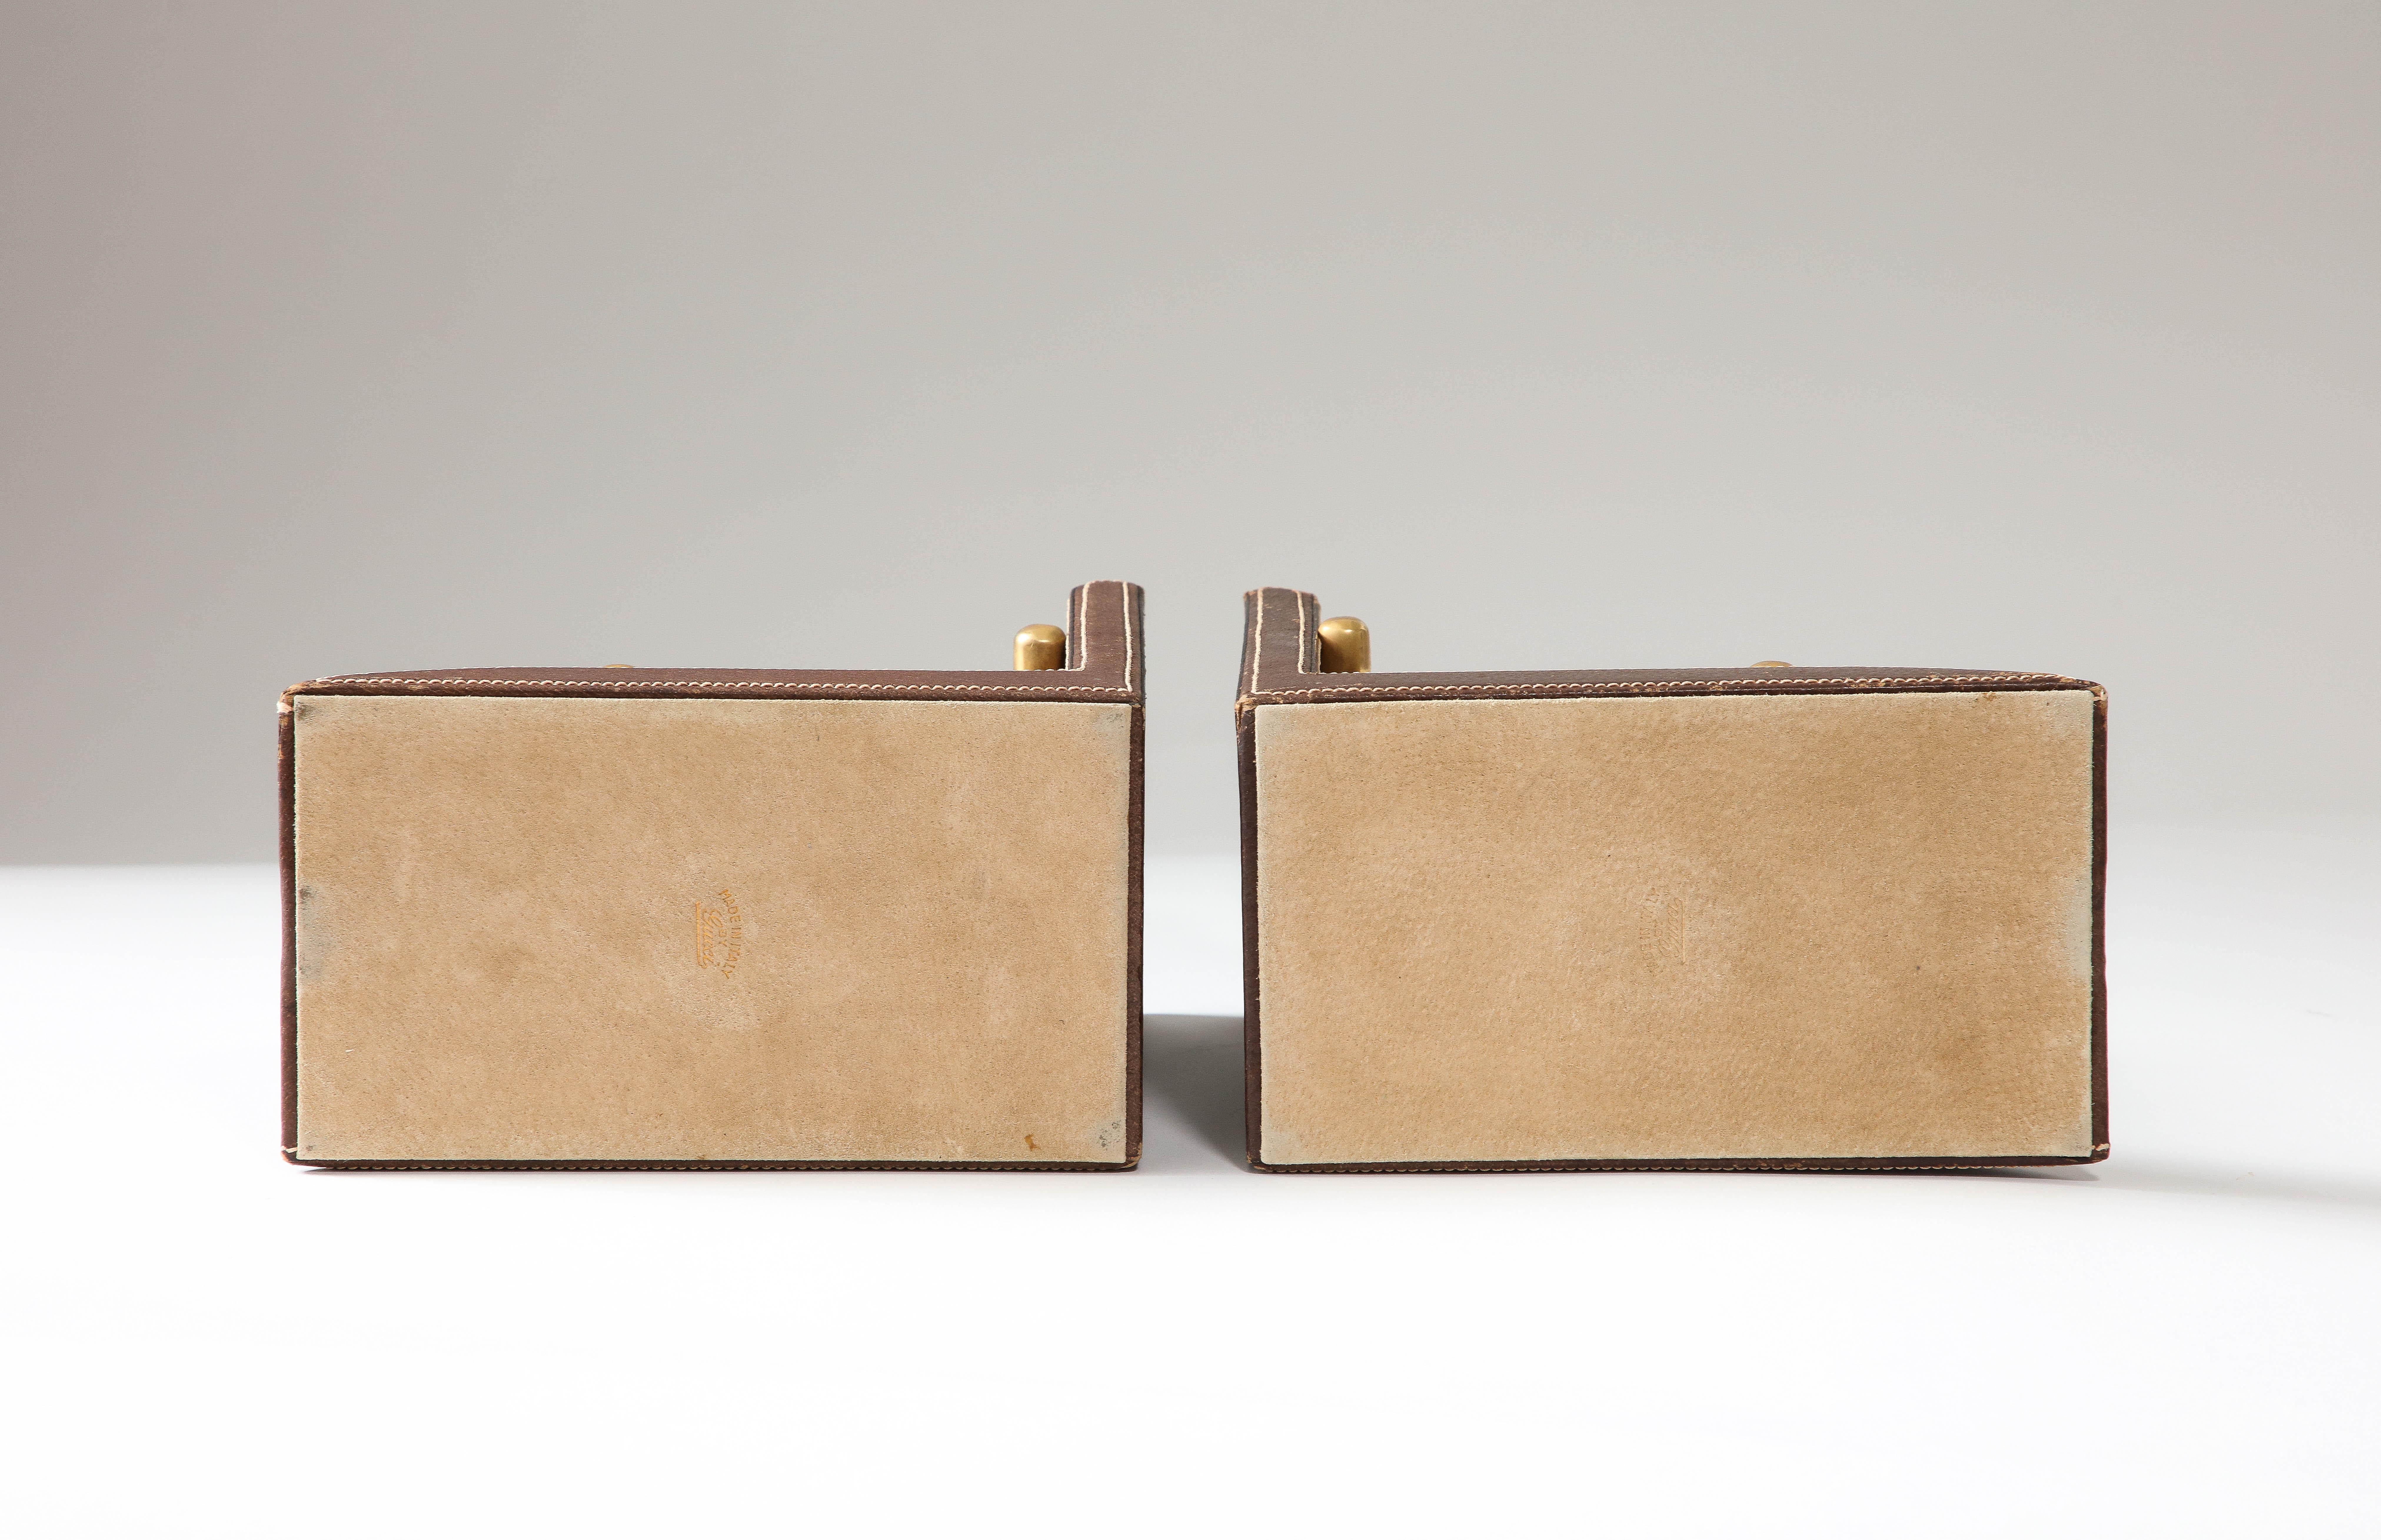 Pair of Leather and Brass Bookends, Gucci, Italy, c. 1970 For Sale 6